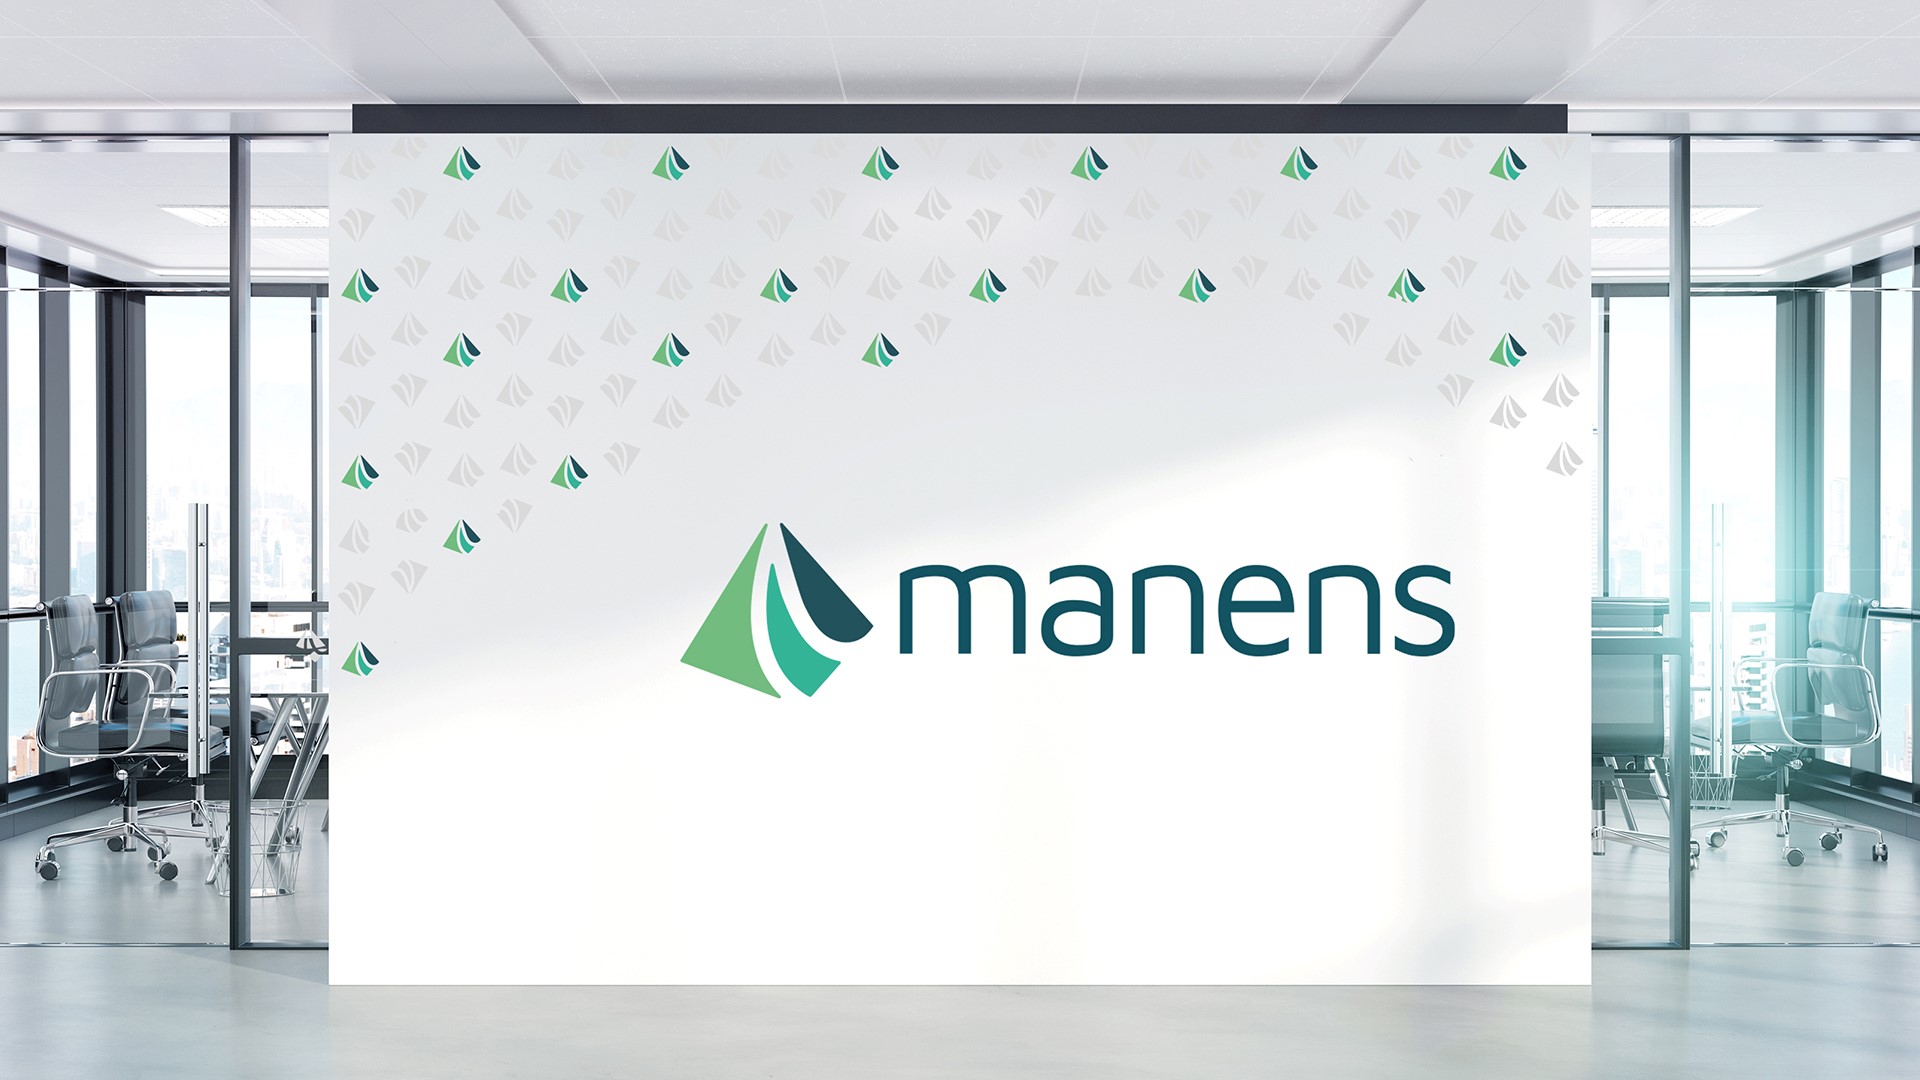 A brand-new identity for the Manens-Tifs-Steam Group